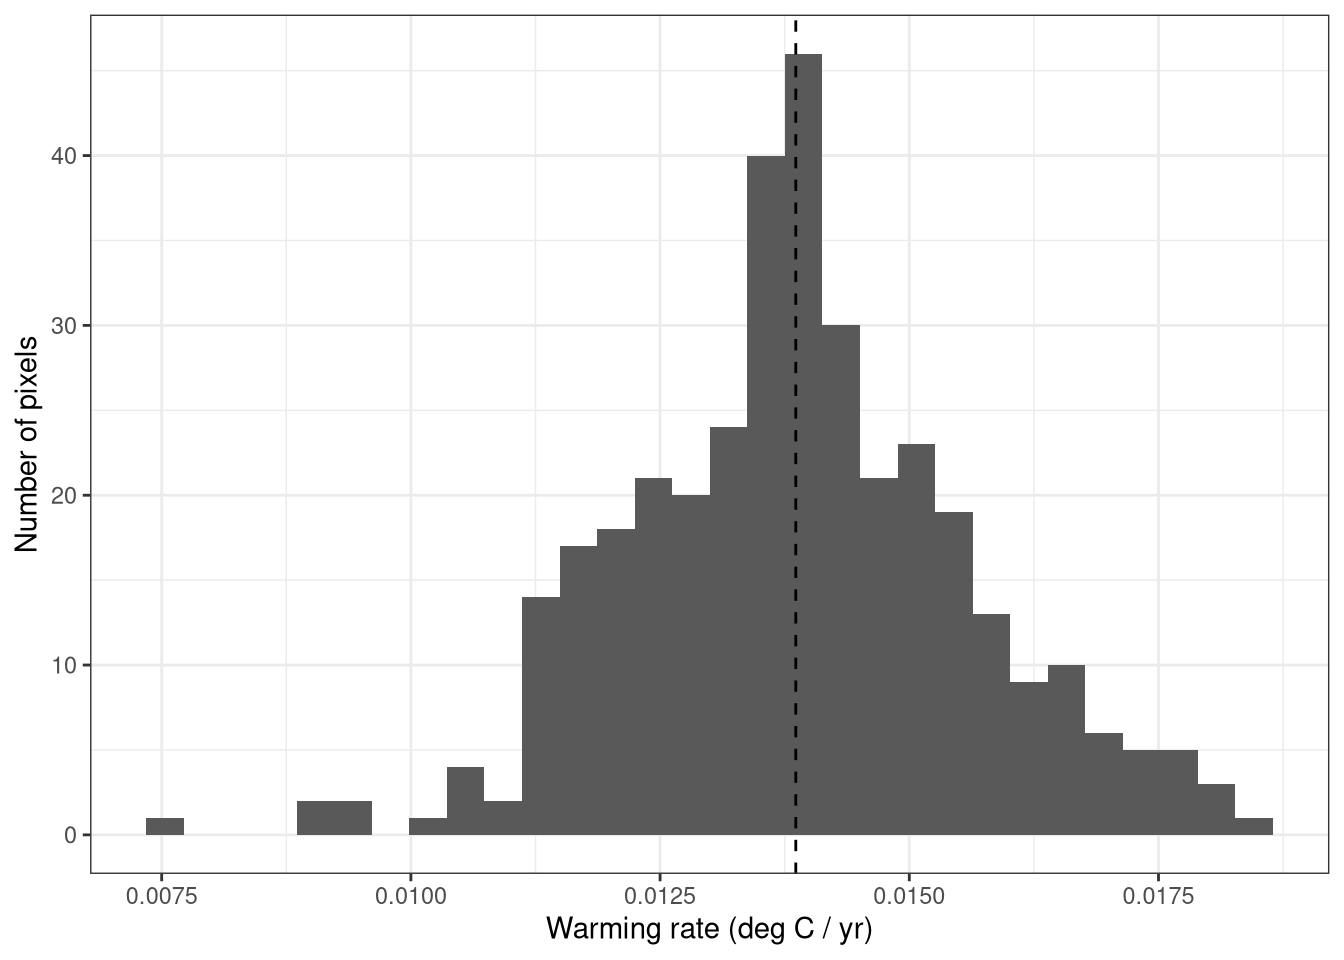 Distribution of warming rate values for FAO region 27.4  The dashed vertical line indicates the median value.